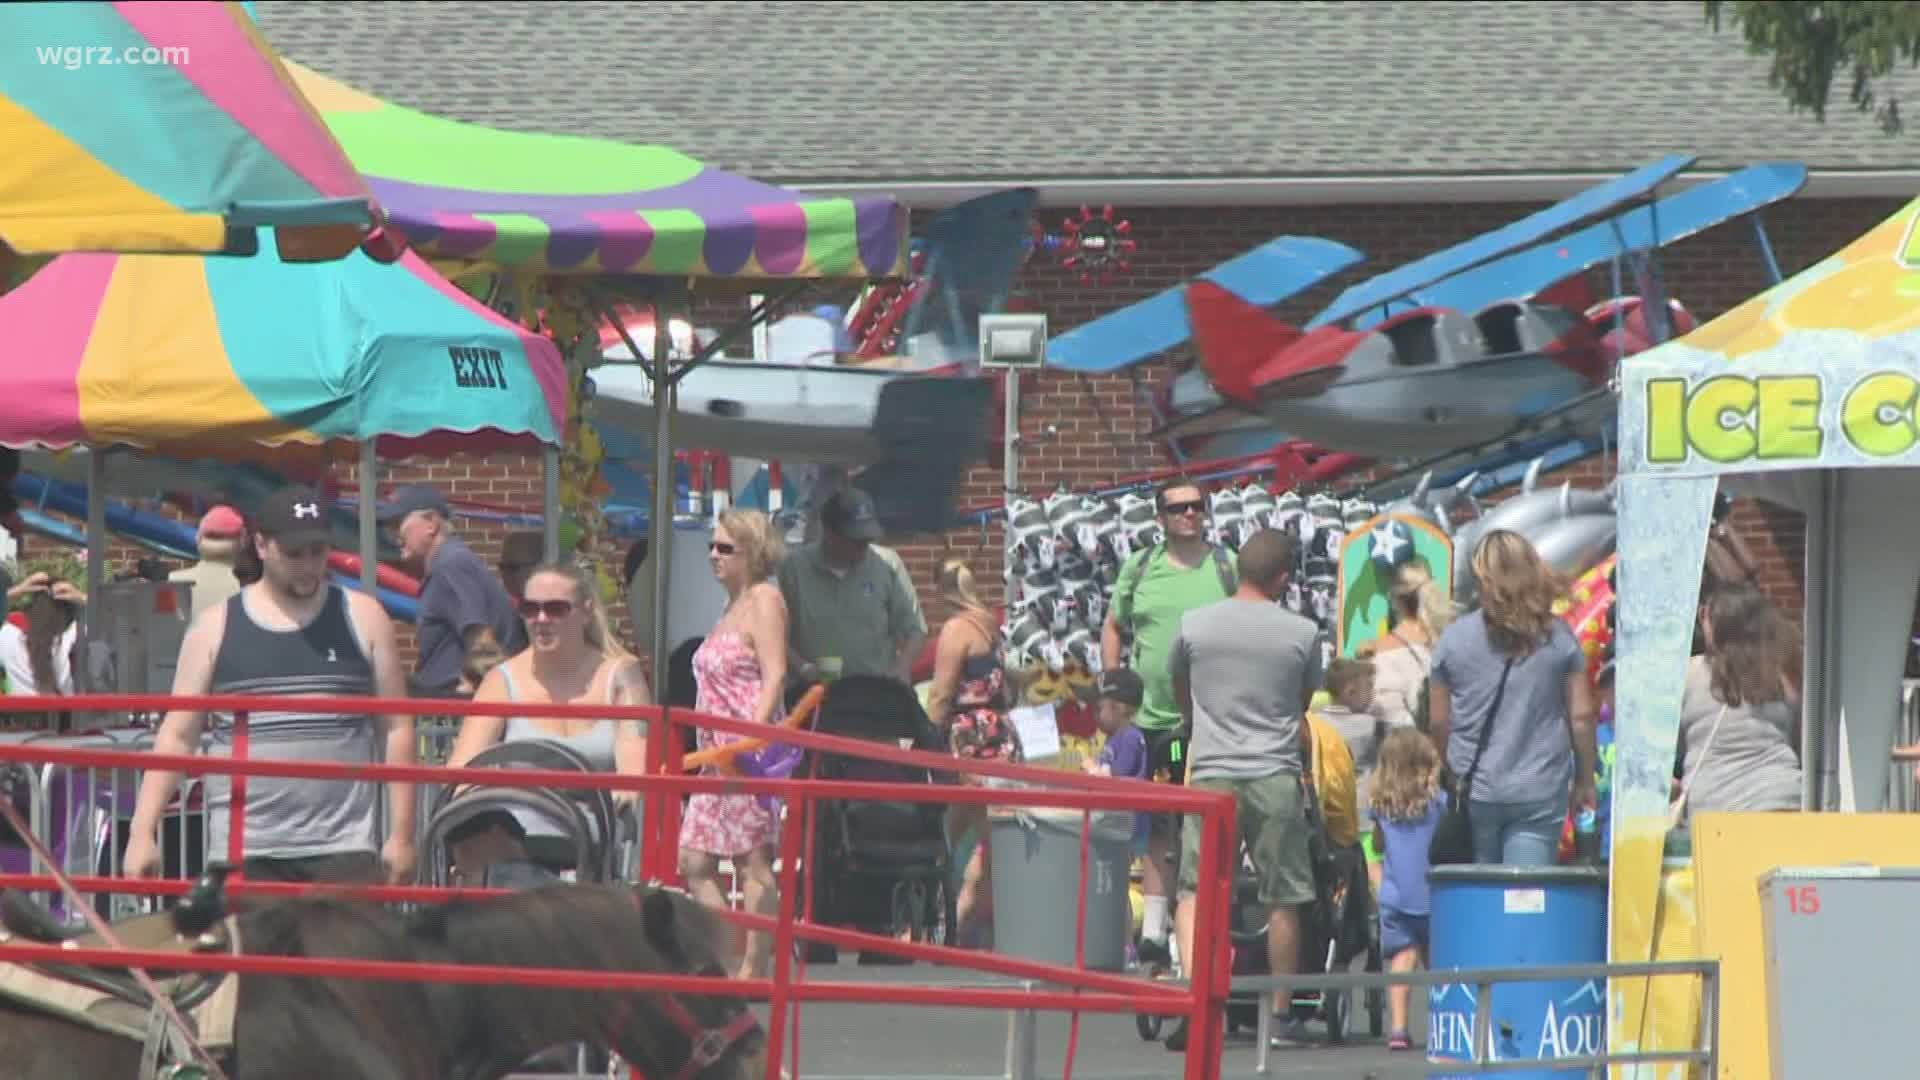 but organizers for the Erie county fair are among those statewide still waiting on guidance for potentially holding their events.